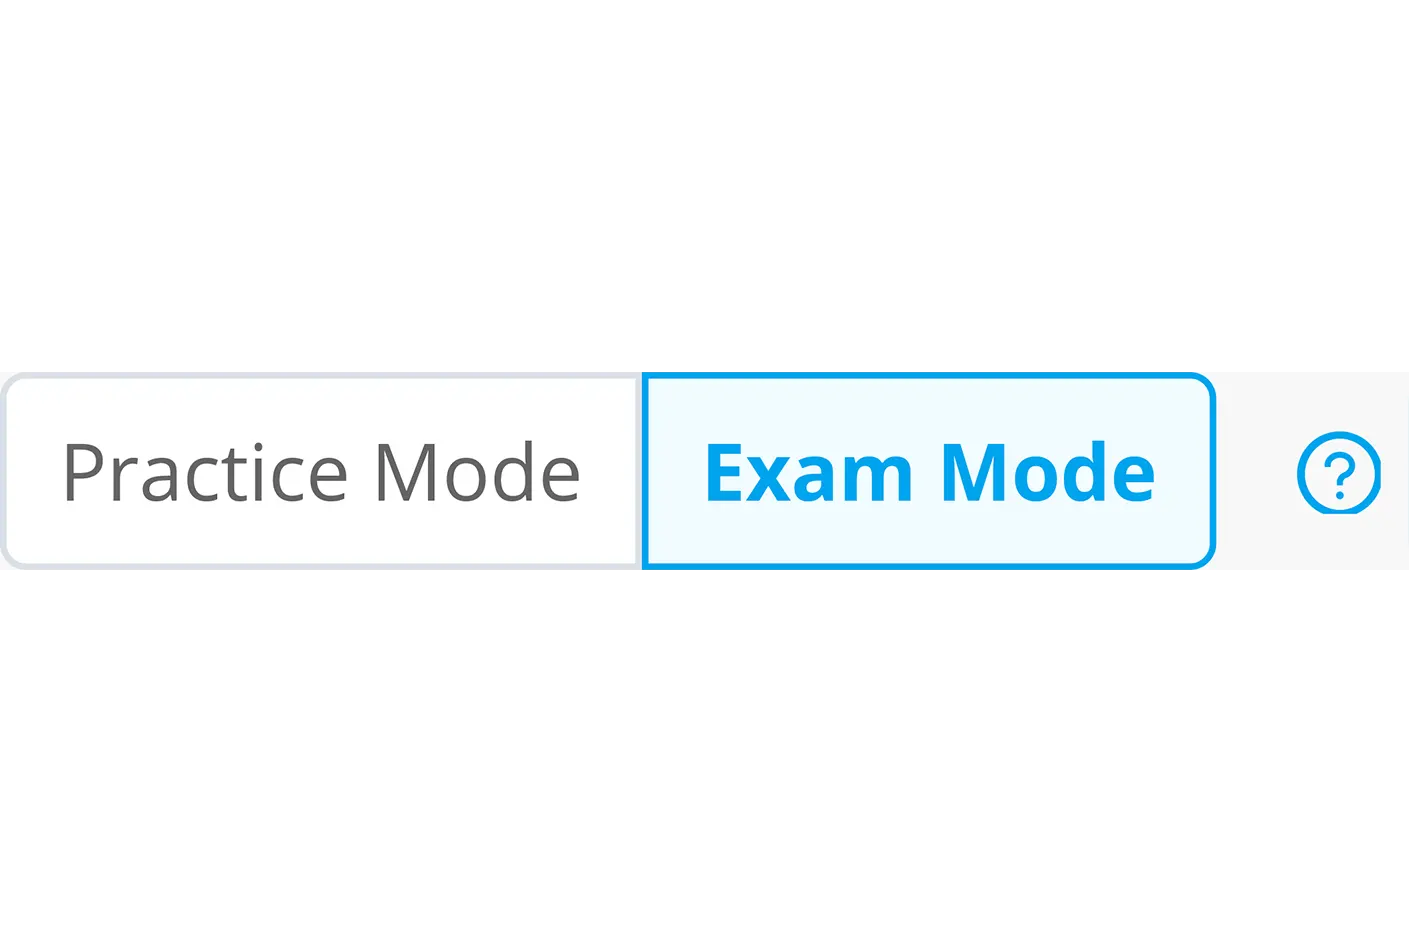 There is a screenshot of exam mode select for Public Service Aptitude Test practice test